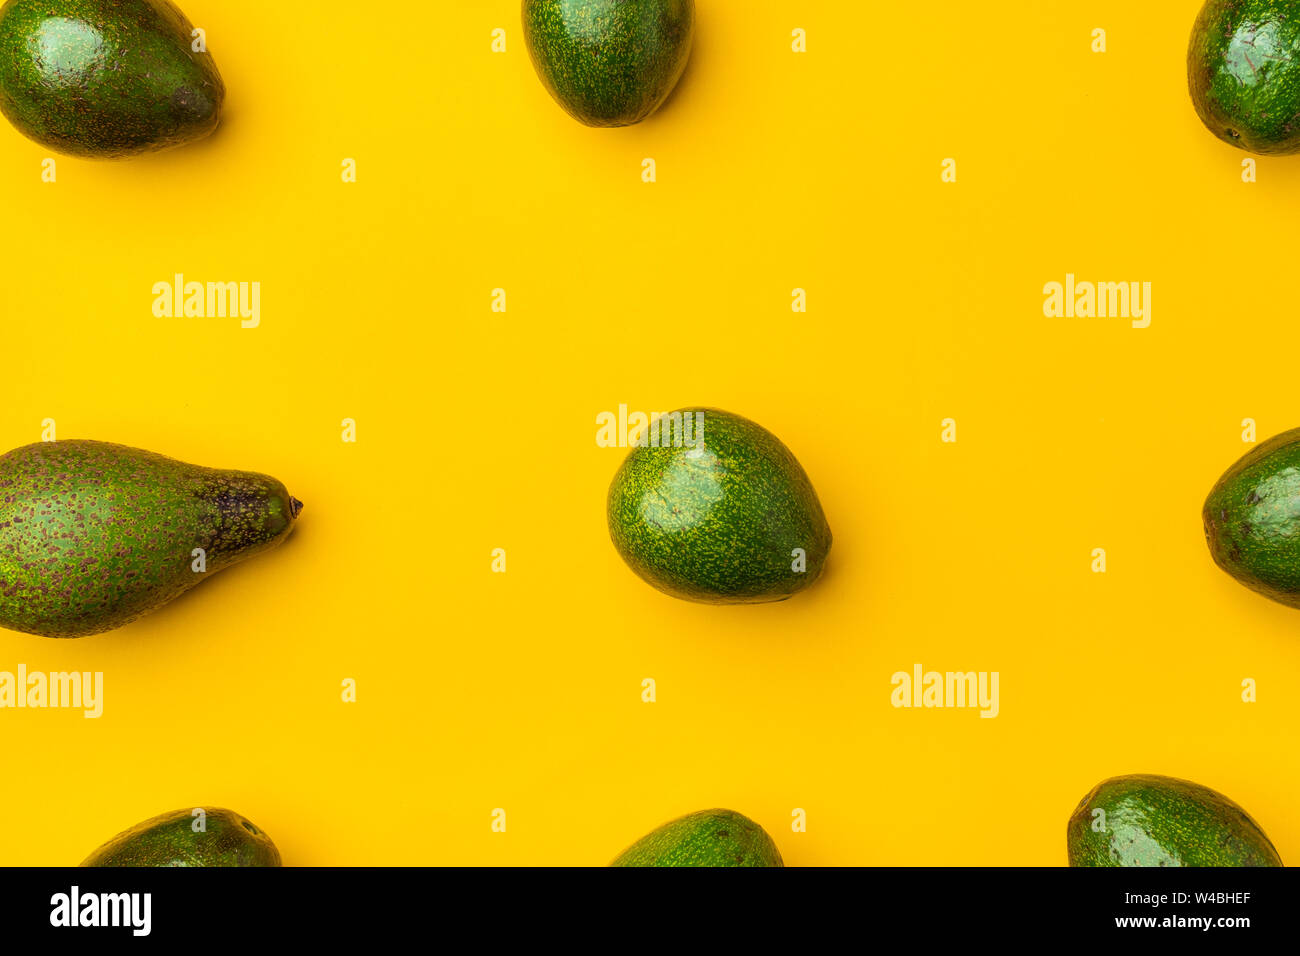 organic avocados whole fruit on yellow table background.Healthy super foods for diet.Fresh vegetable from farm.keto food ingredients.alignment in patt Stock Photo